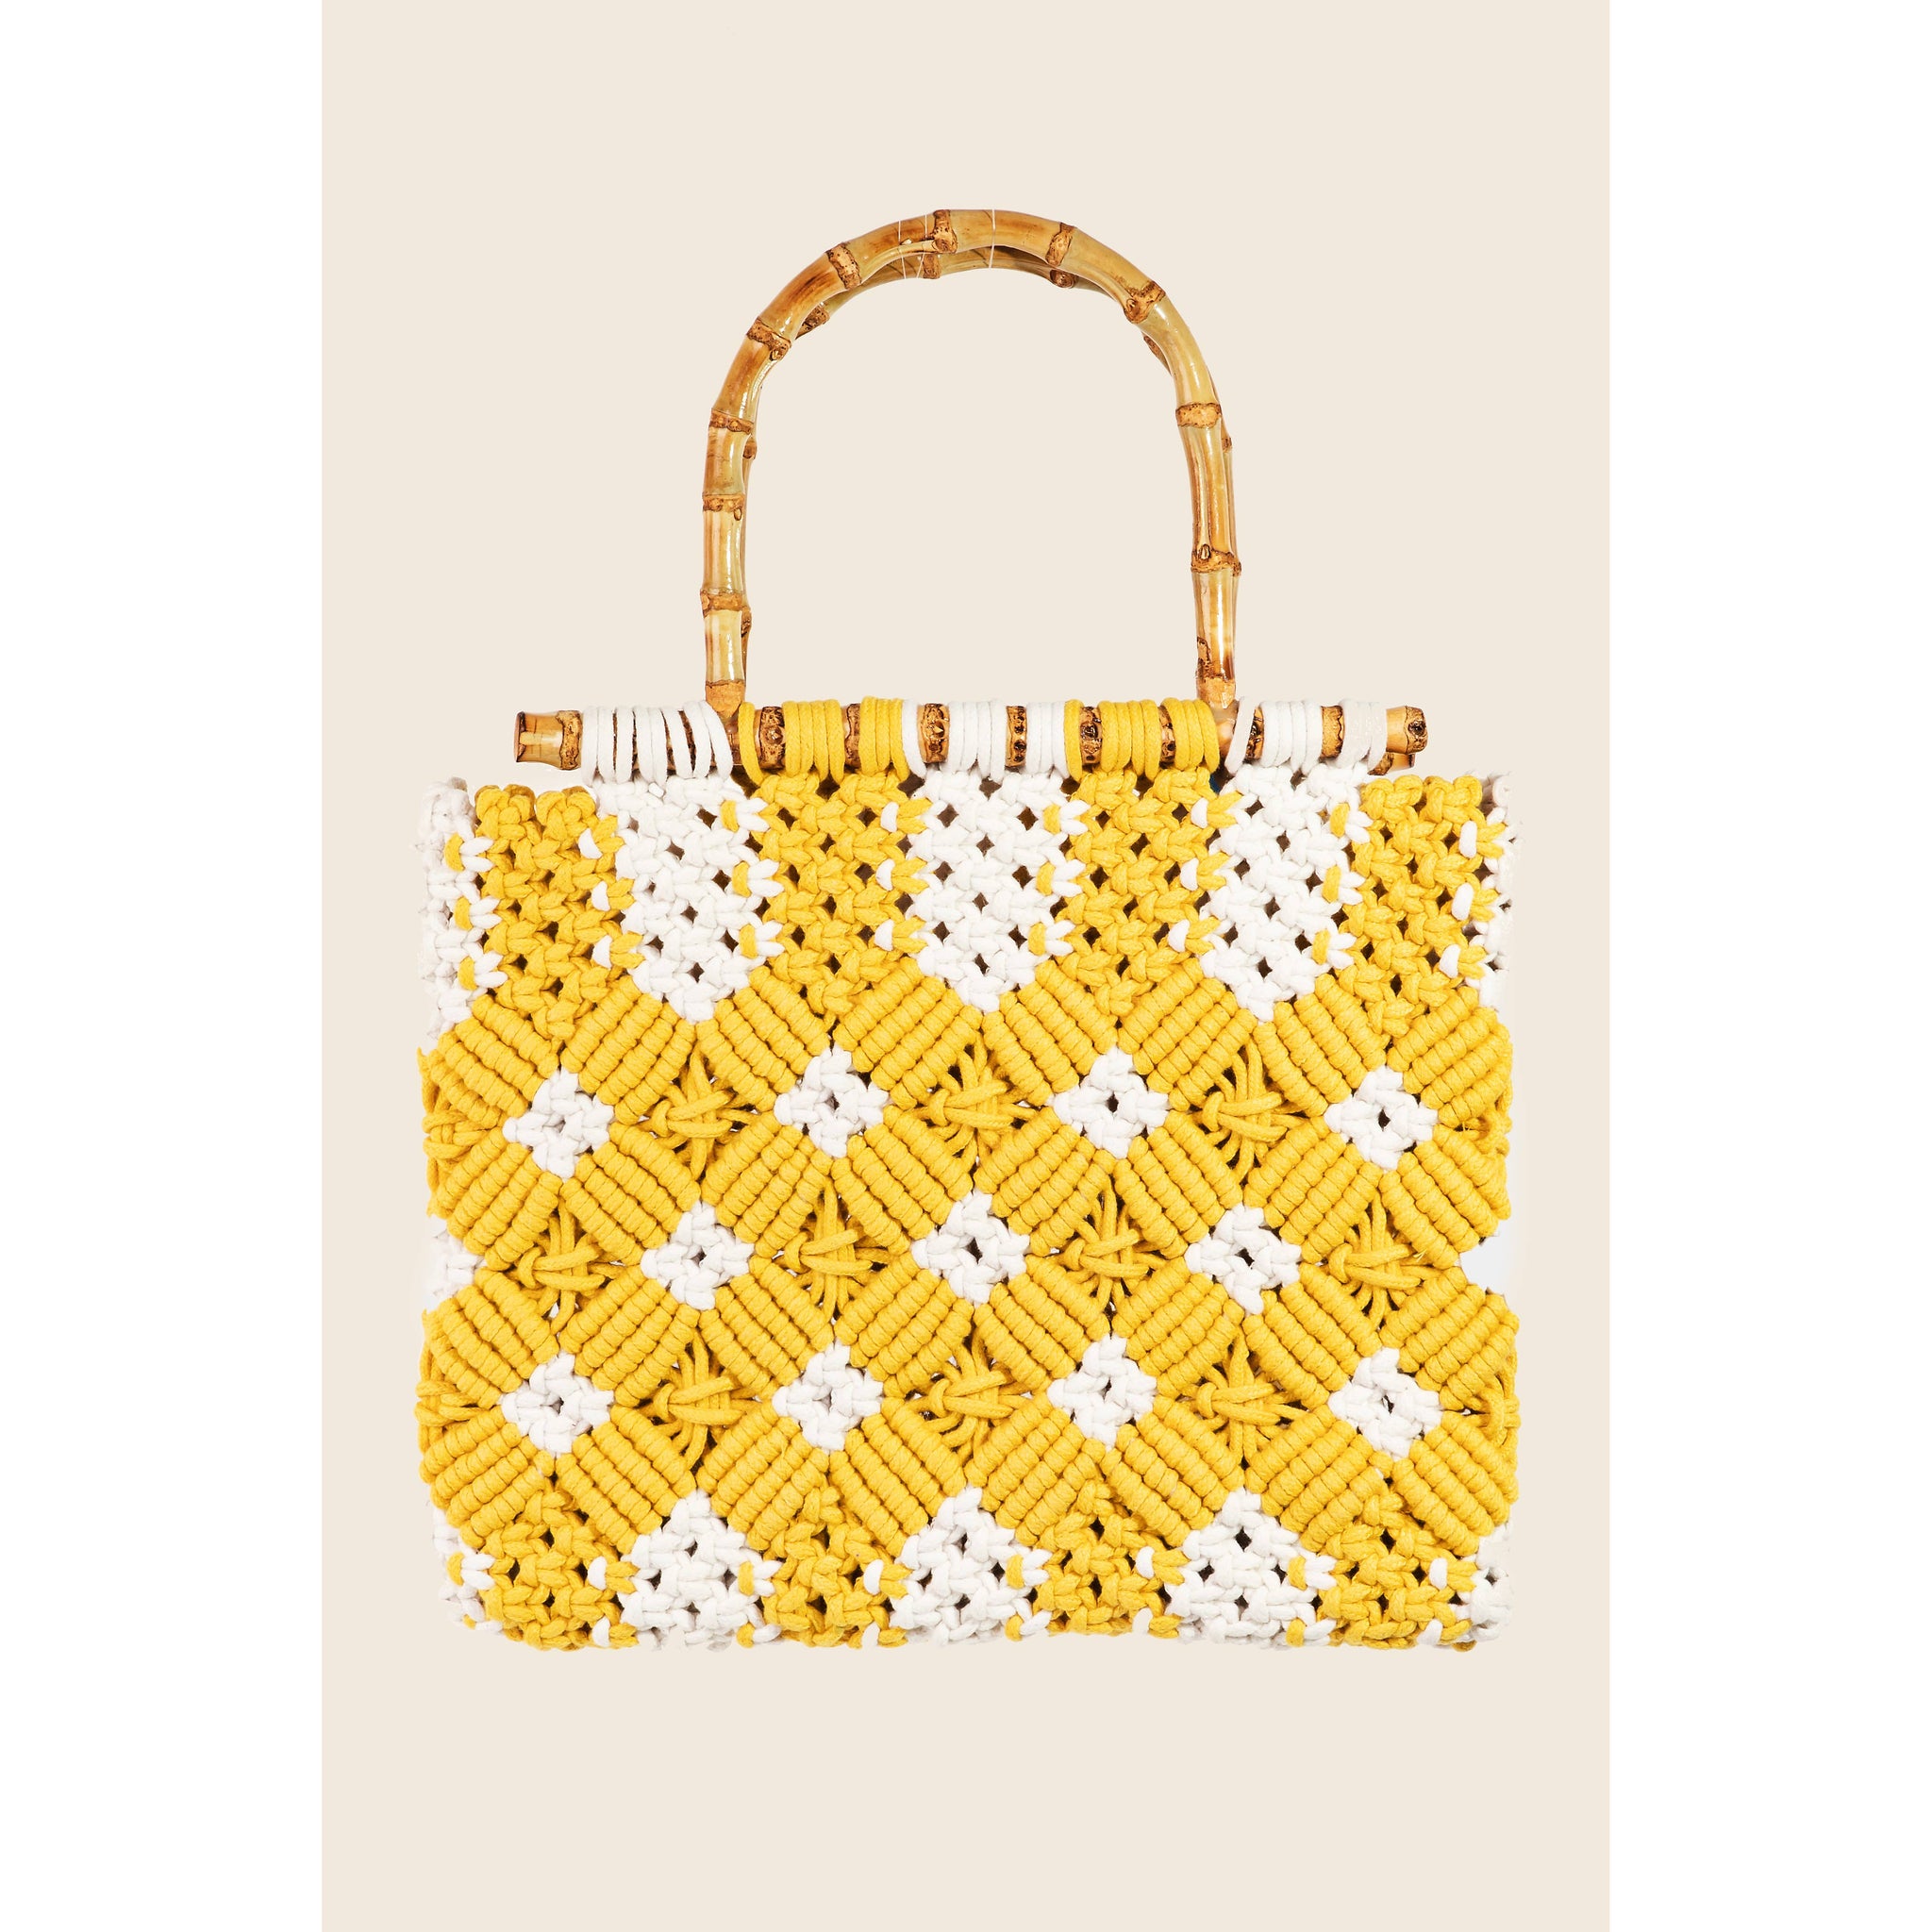 Braided Wooden Top Handle Bag: YELLOW